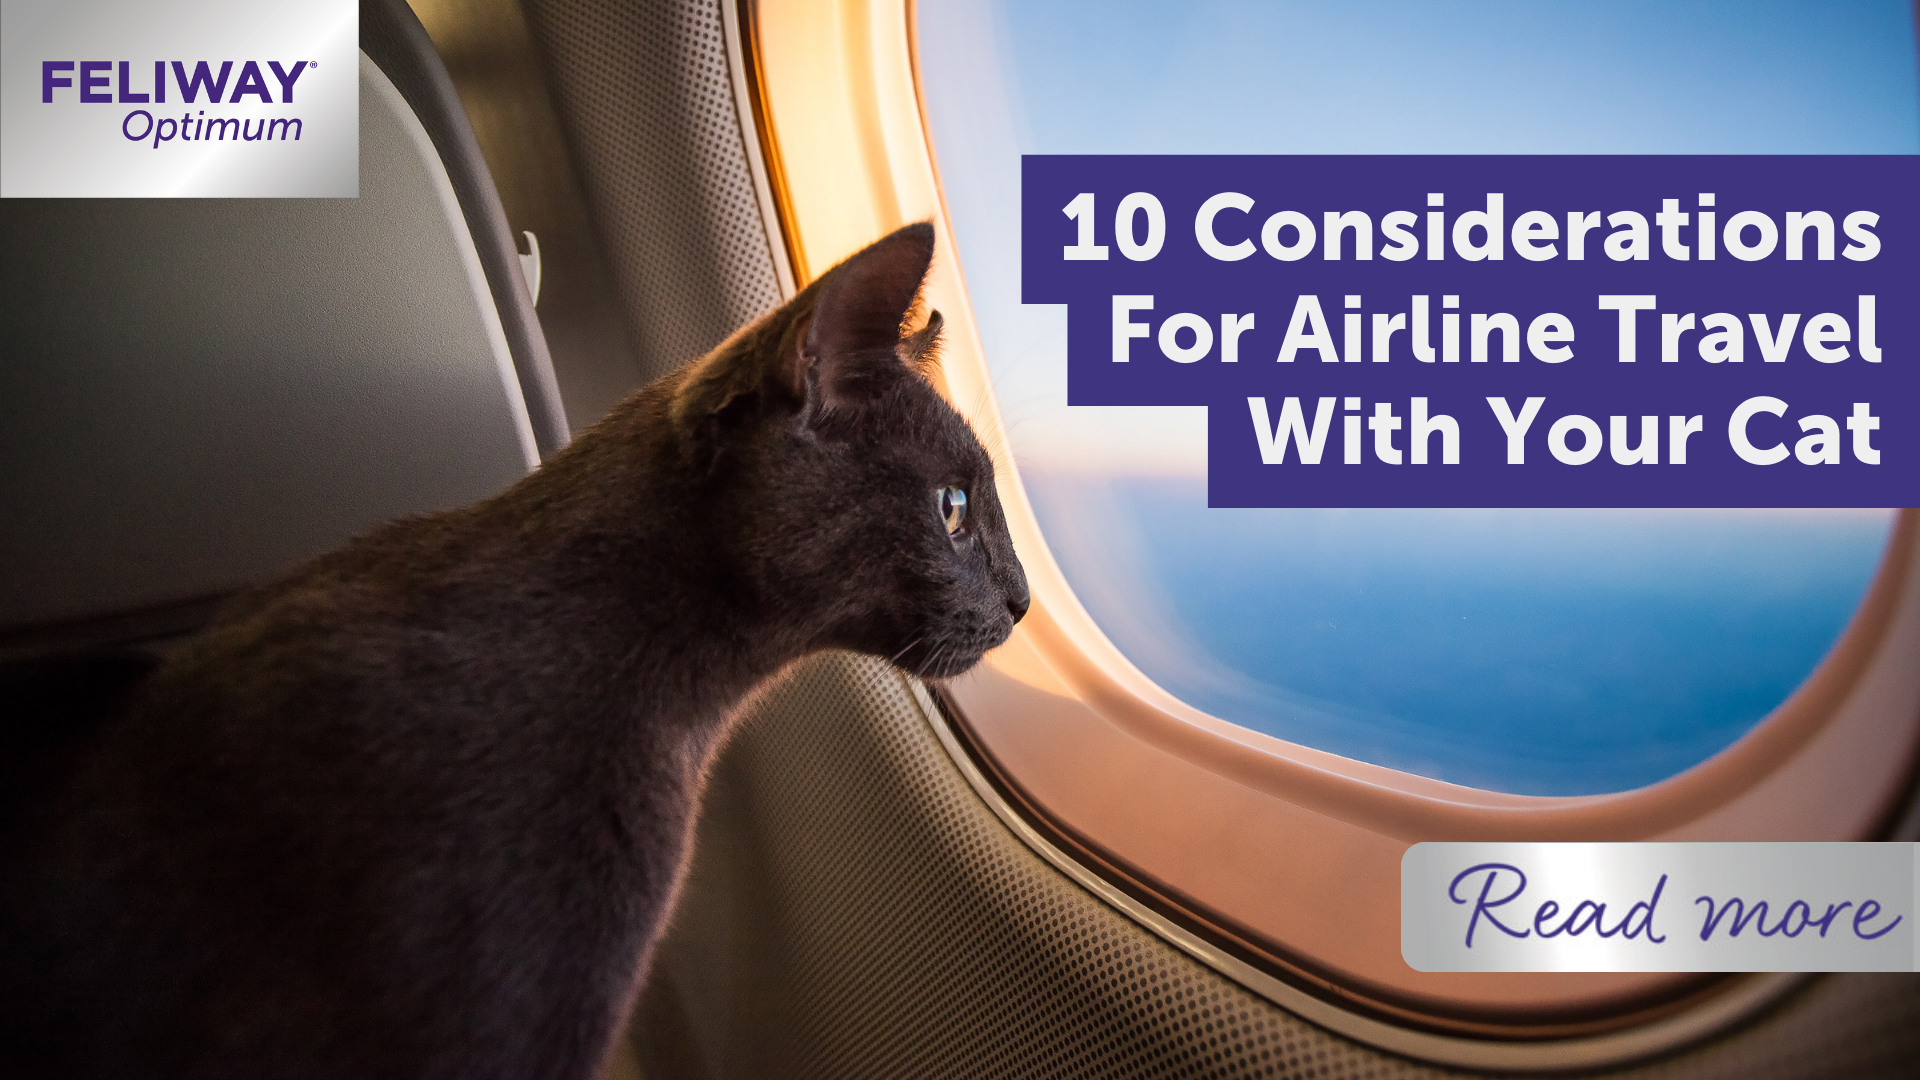 THE BEST CARRIERS FOR TRAVELLING BY PLANE WITH YOUR CAT